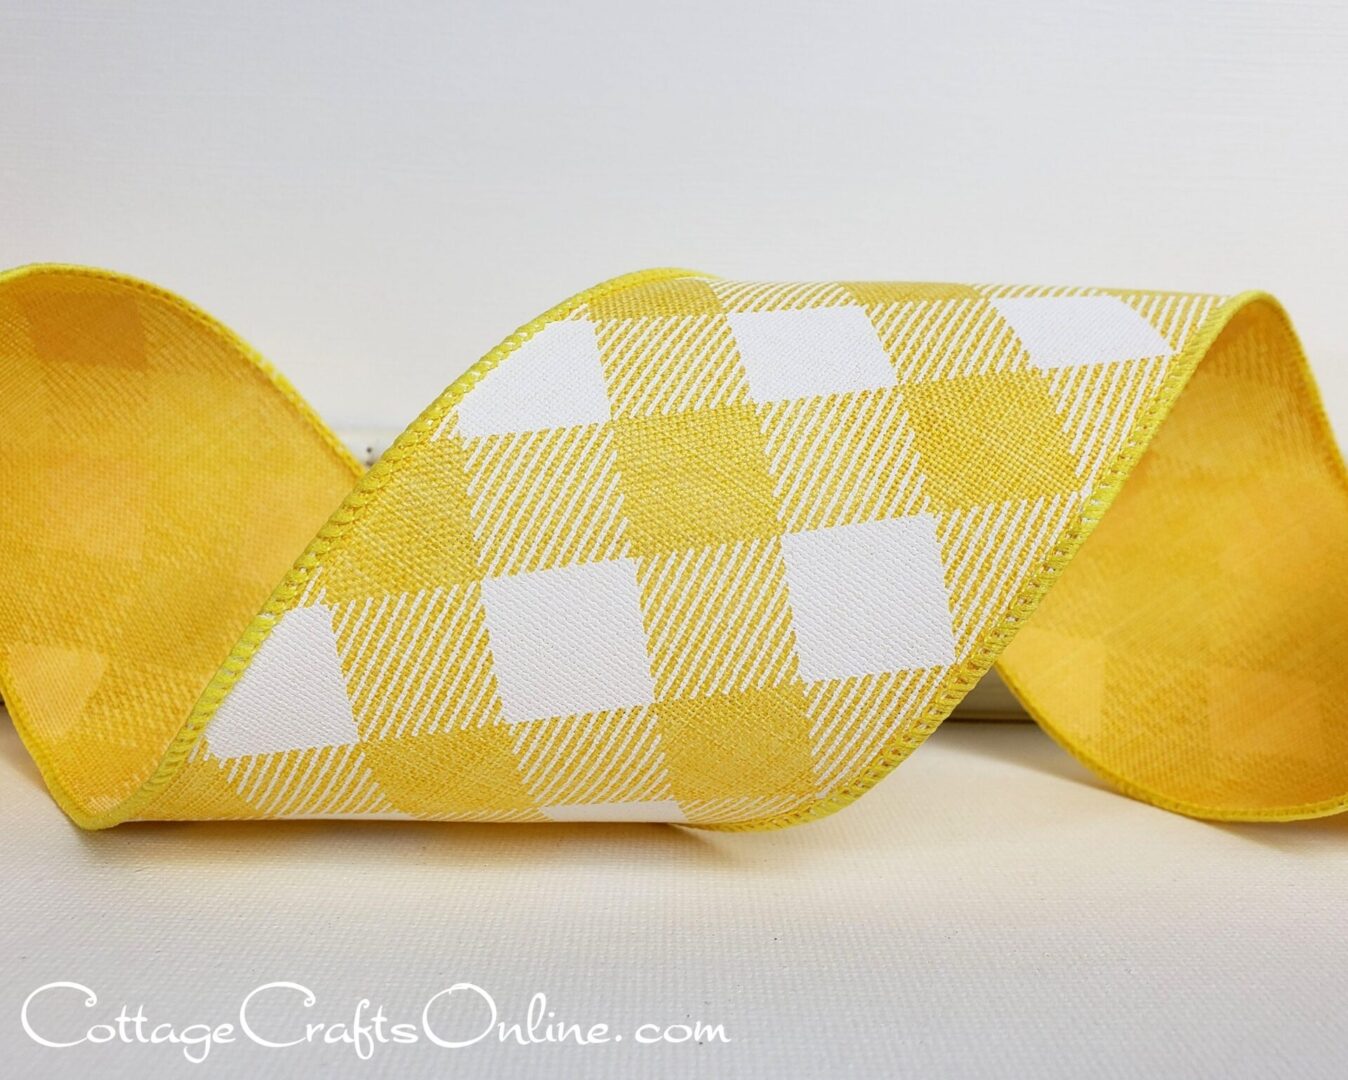 yellow and white gingham ribbon with black and grey accents.